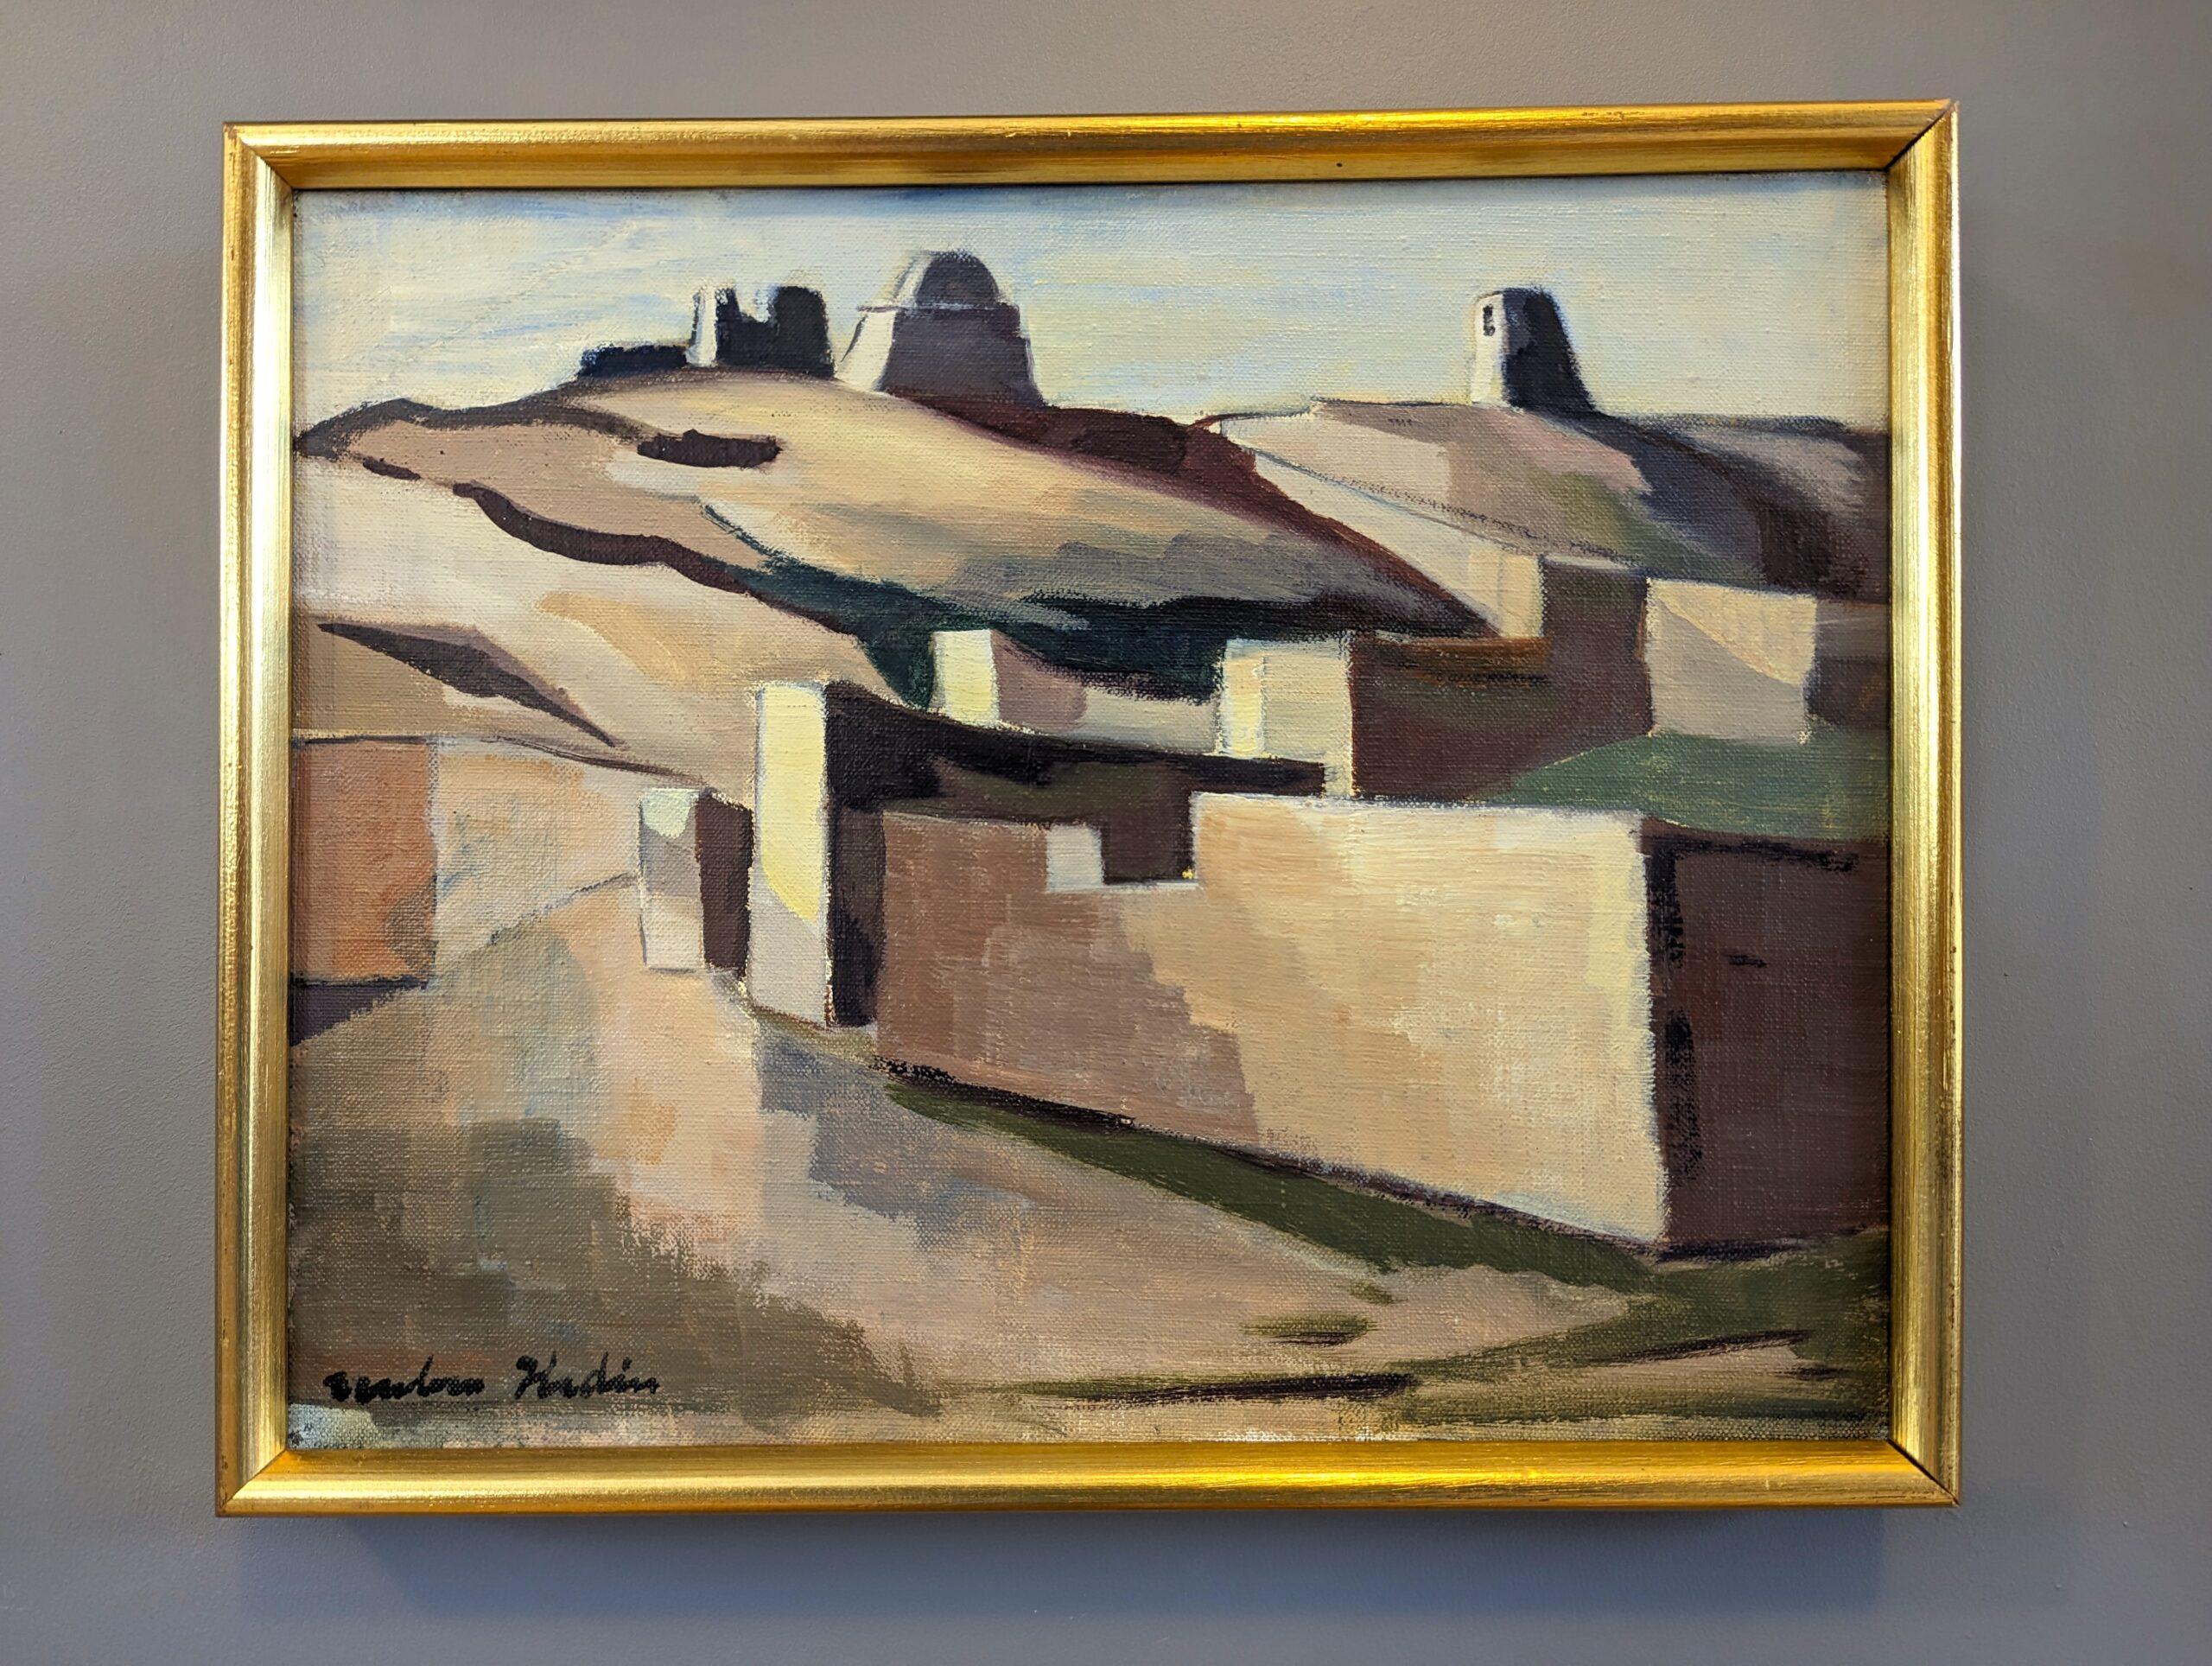 DESERT LANDS
Size: 29 x 36 cm (including frame)
Oil on Canvas Board

A very well executed mid century modernist landscape composition, painted in oil onto canvas board.

This painting features warm earthy tones, carefully applied brushwork and a